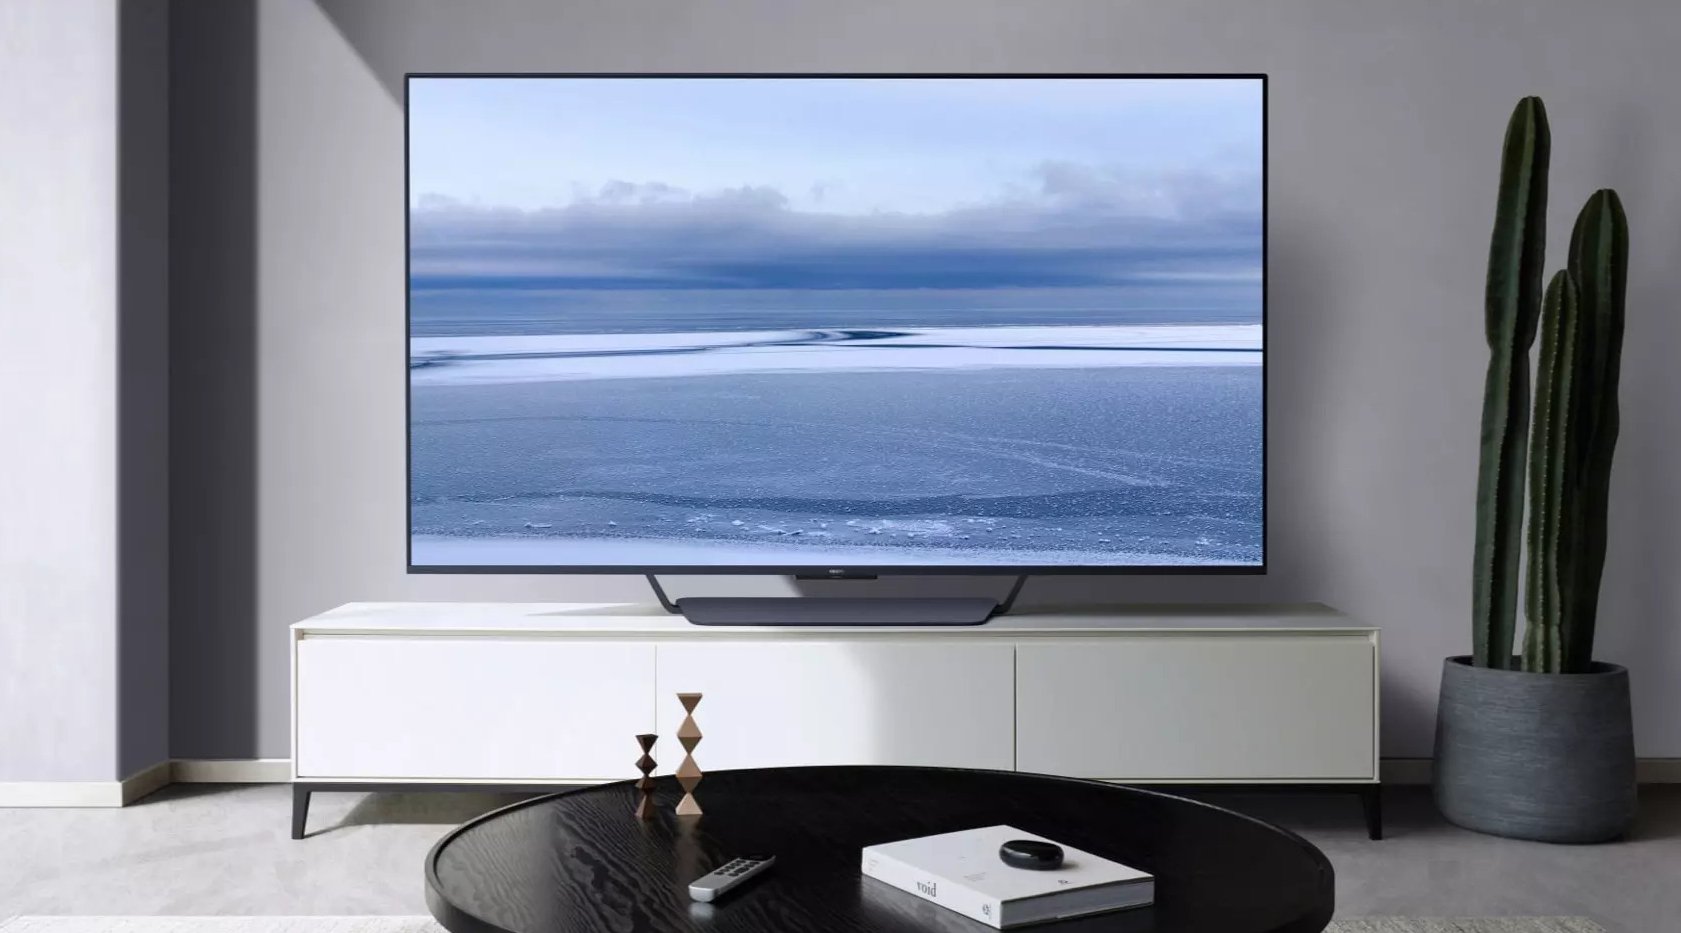 OPPO will reportedly launch a new initial Smart TV in China on May 6th